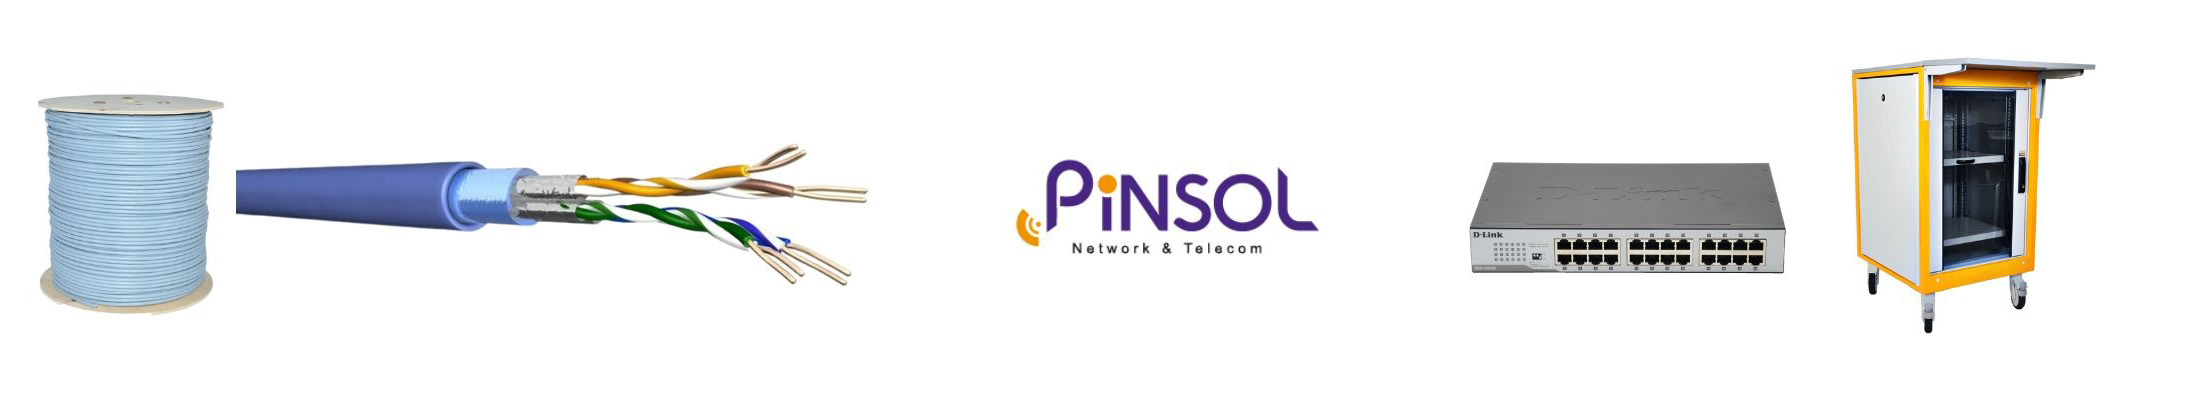 Pinsol Network's profile banner